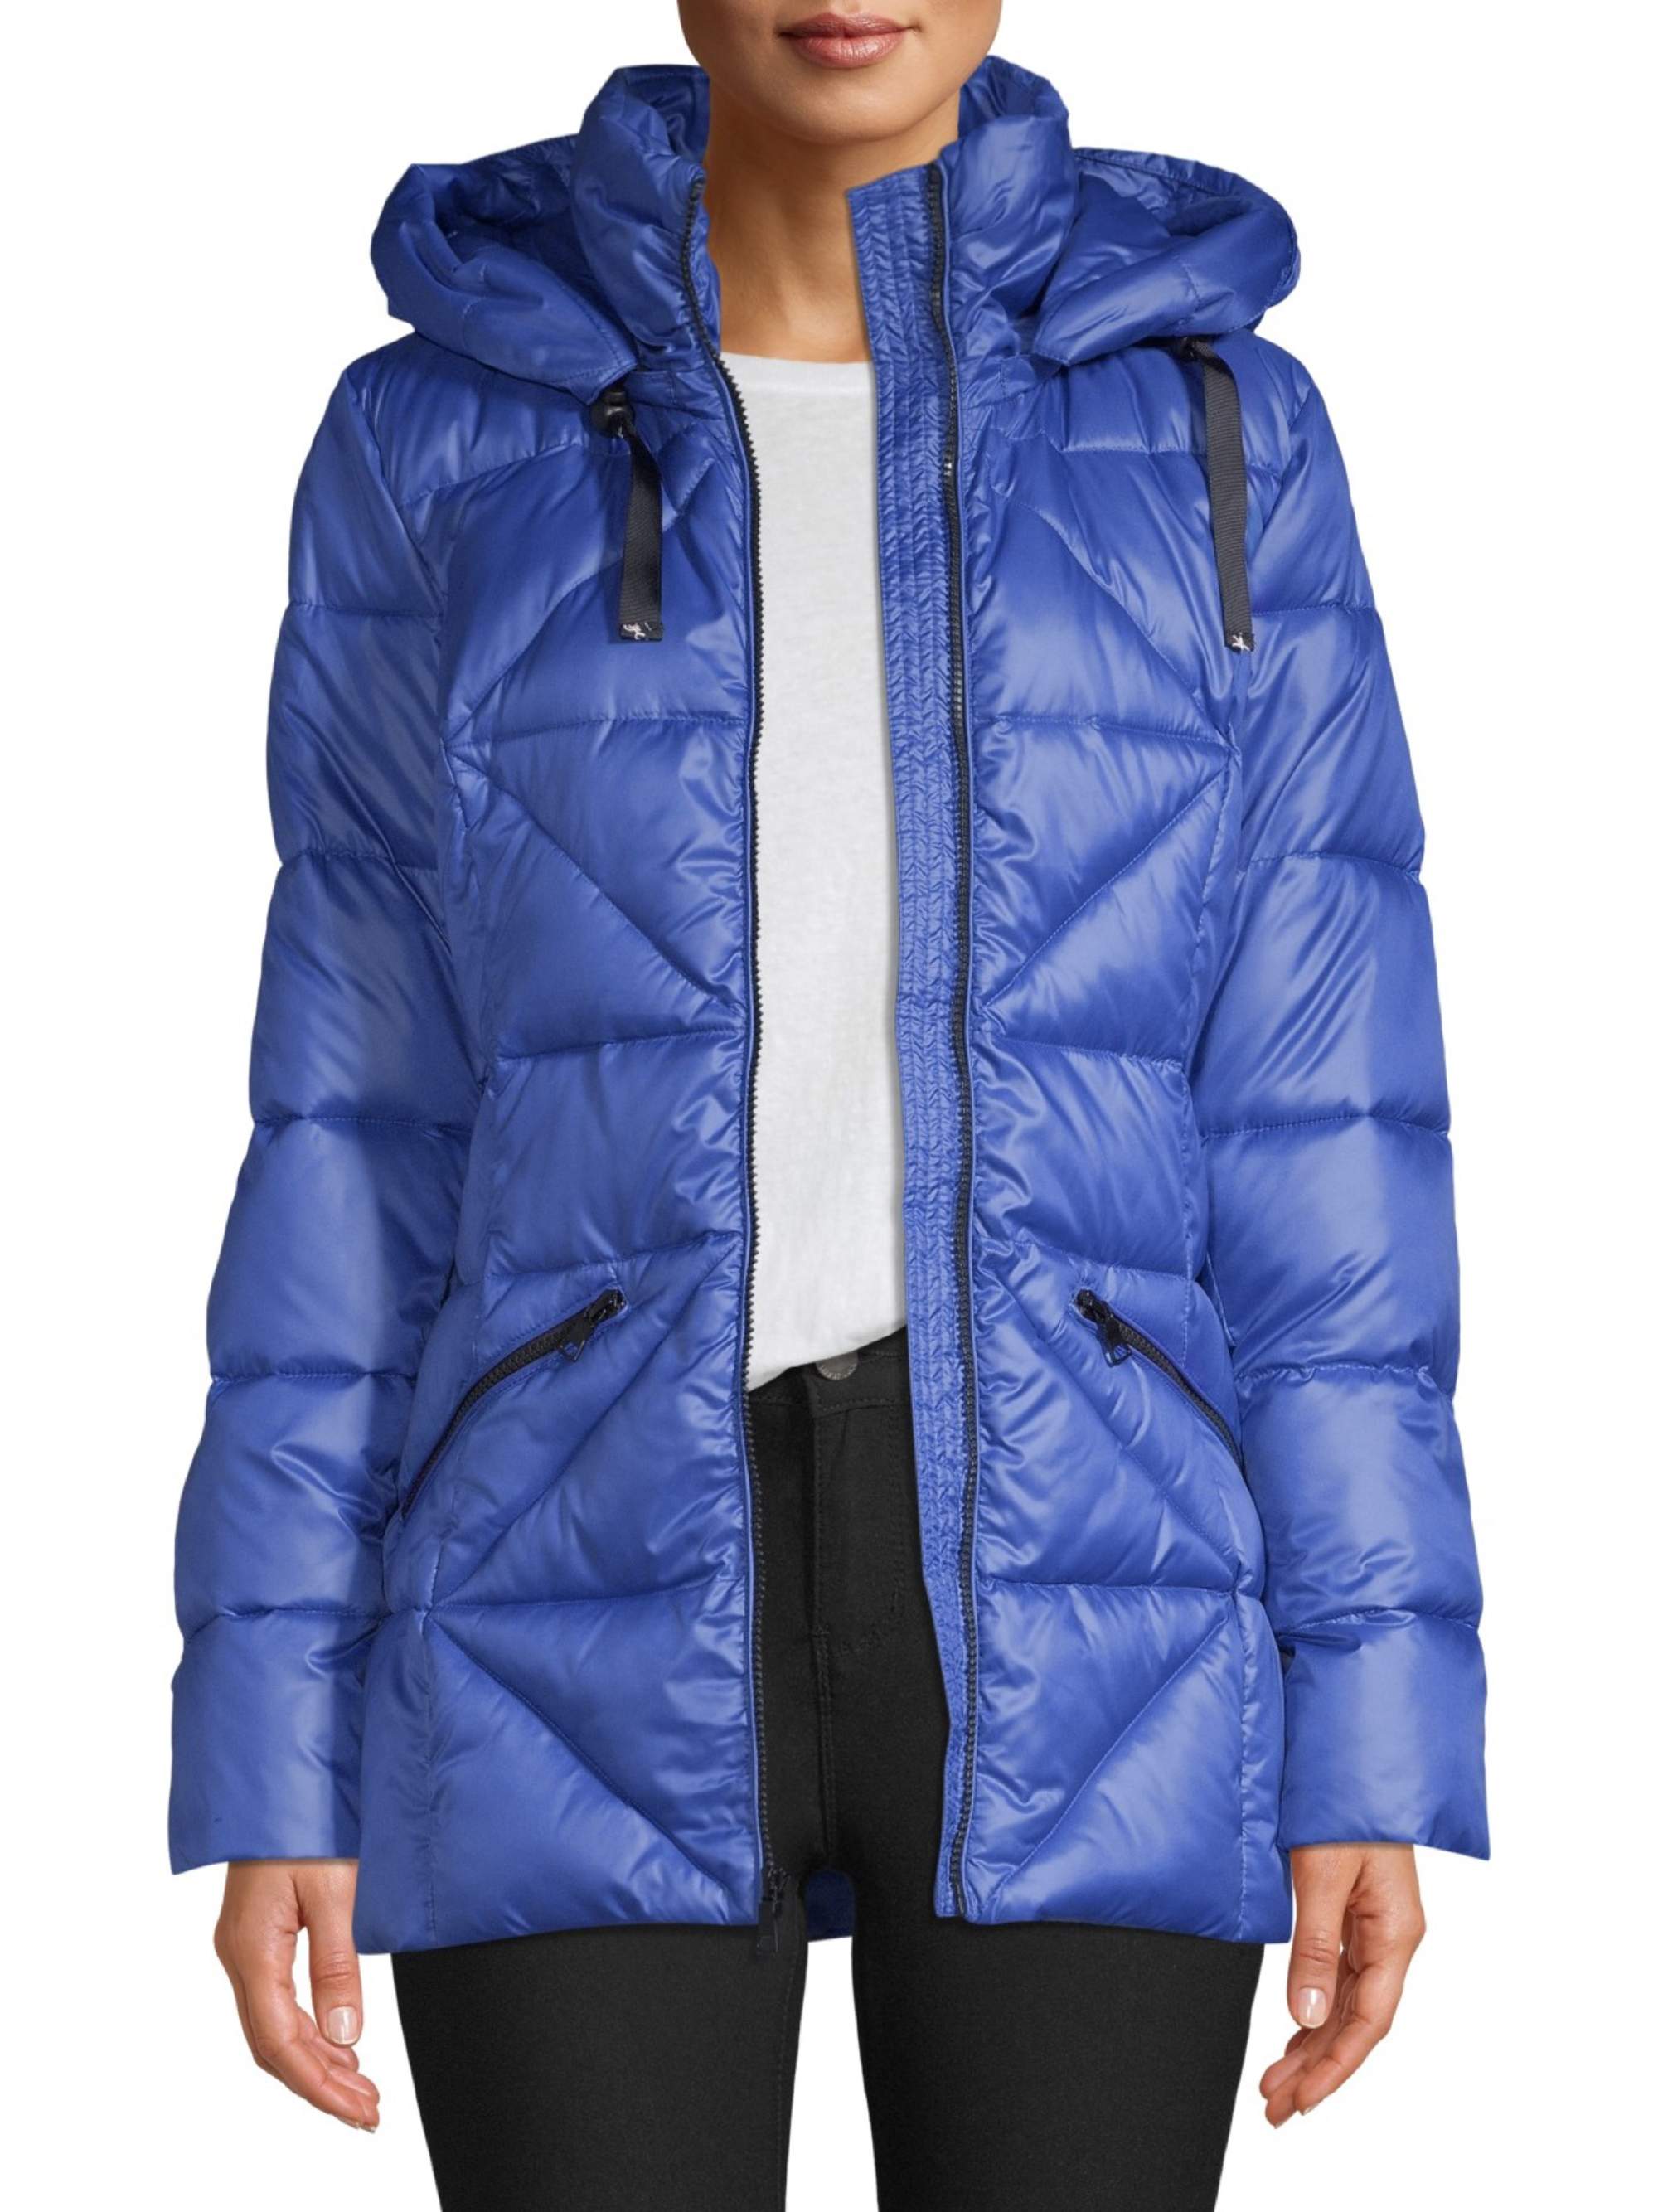 Kendall + Kylie Women's Shiny Long Puffer with Bold Zipper Detail - image 1 of 6